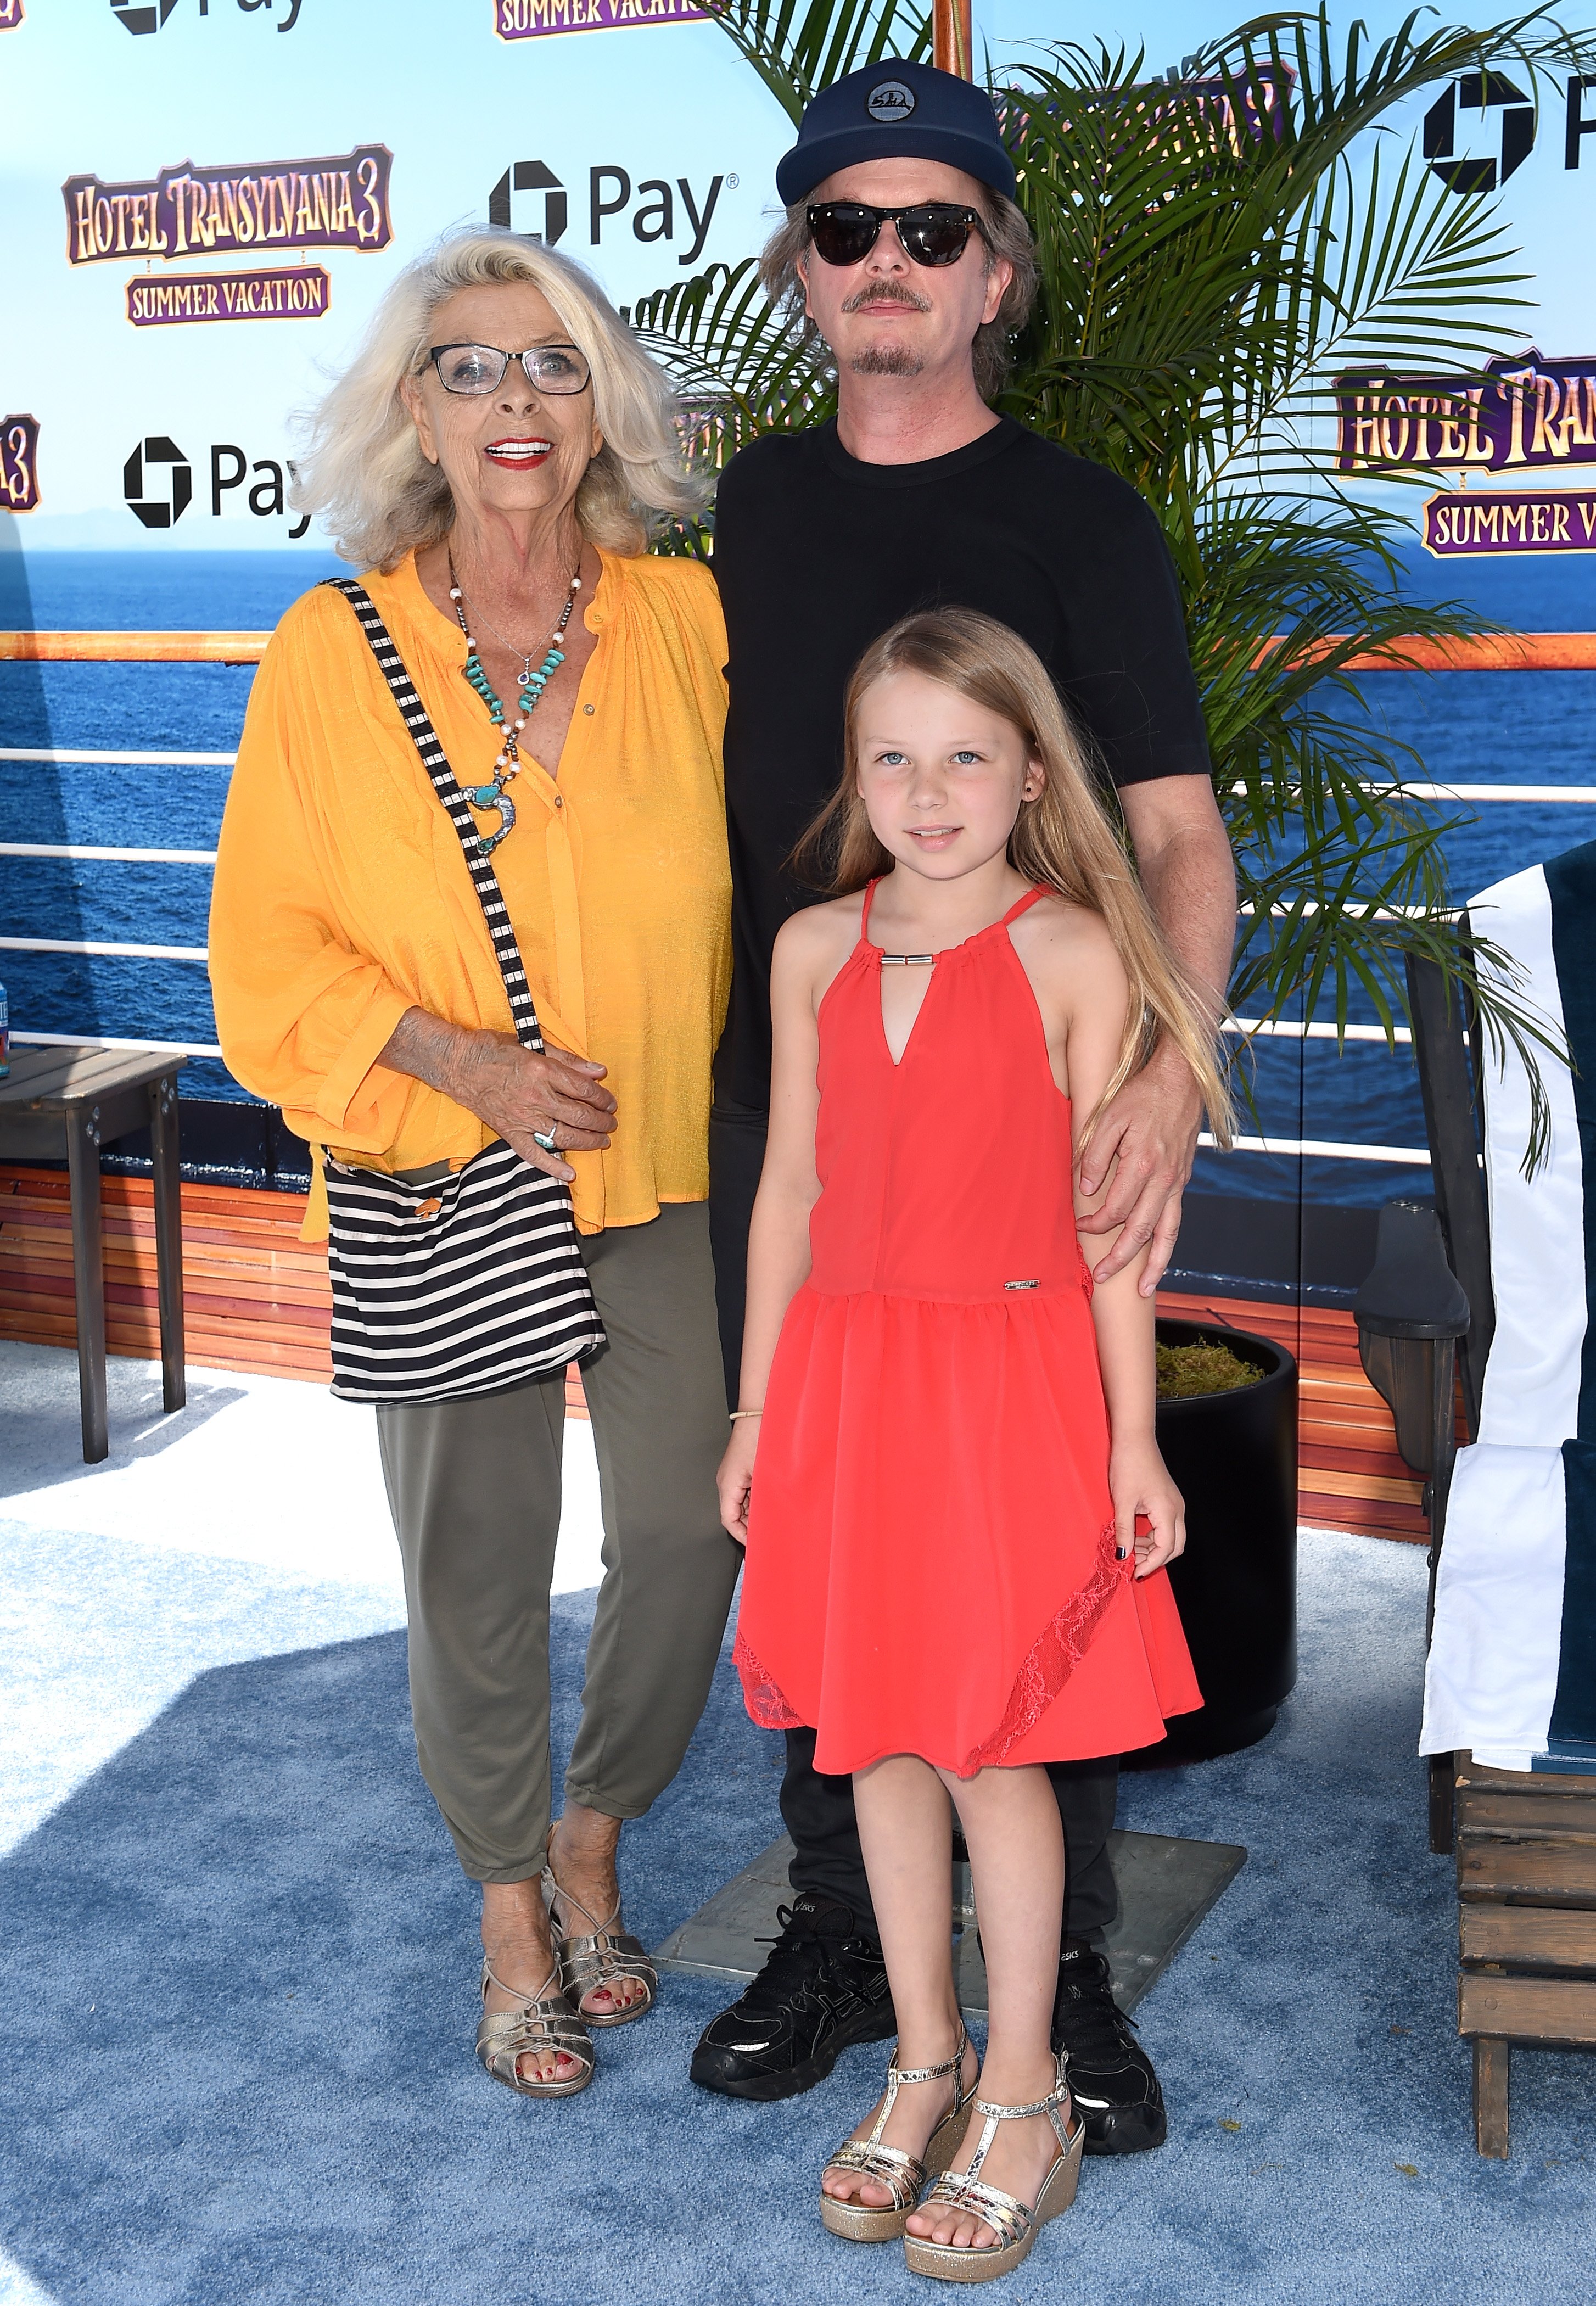  David Spade, mom Judith M. Spade and daughter Harper Spade at the world premiere of "Hotel Transylvania 3: Summer Vacation" in 2018, in Westwood, California. | Source: Getty Images